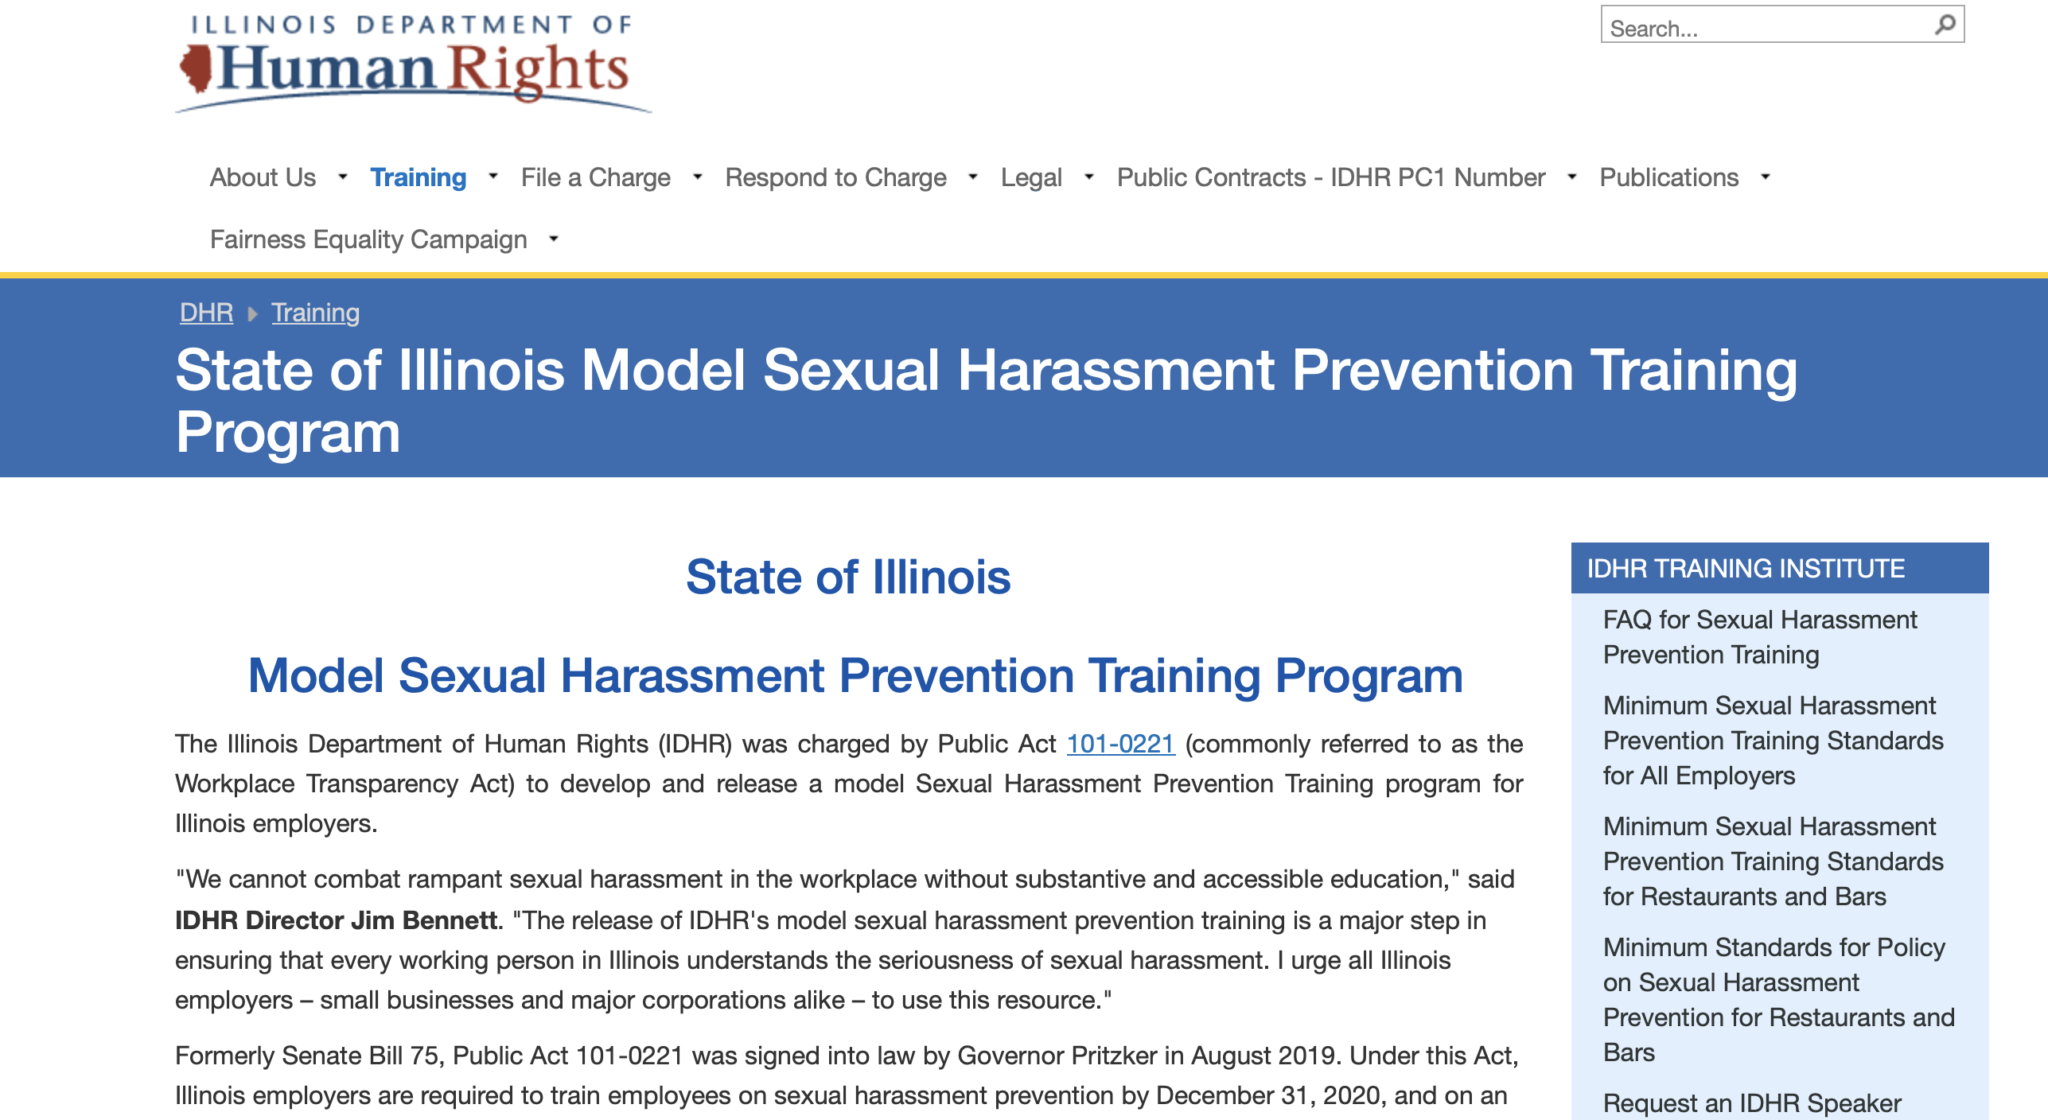 Minimum Sexual Harassment Prevention Training Standards For All 7350